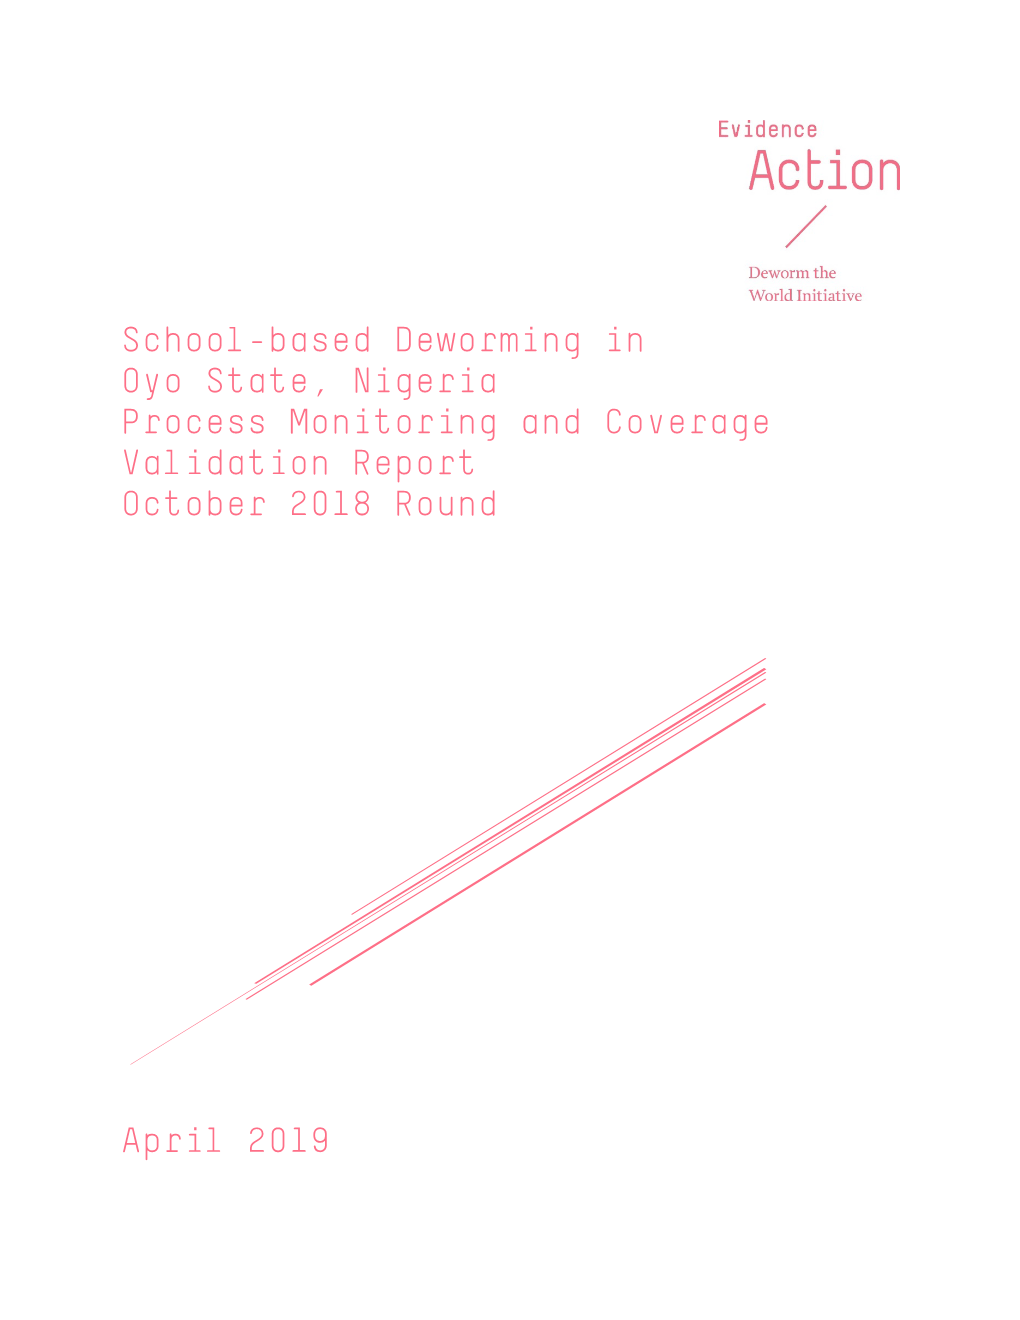 School-Based Deworming in Oyo State, Nigeria Process Monitoring and Coverage Validation Report October 2018 Round